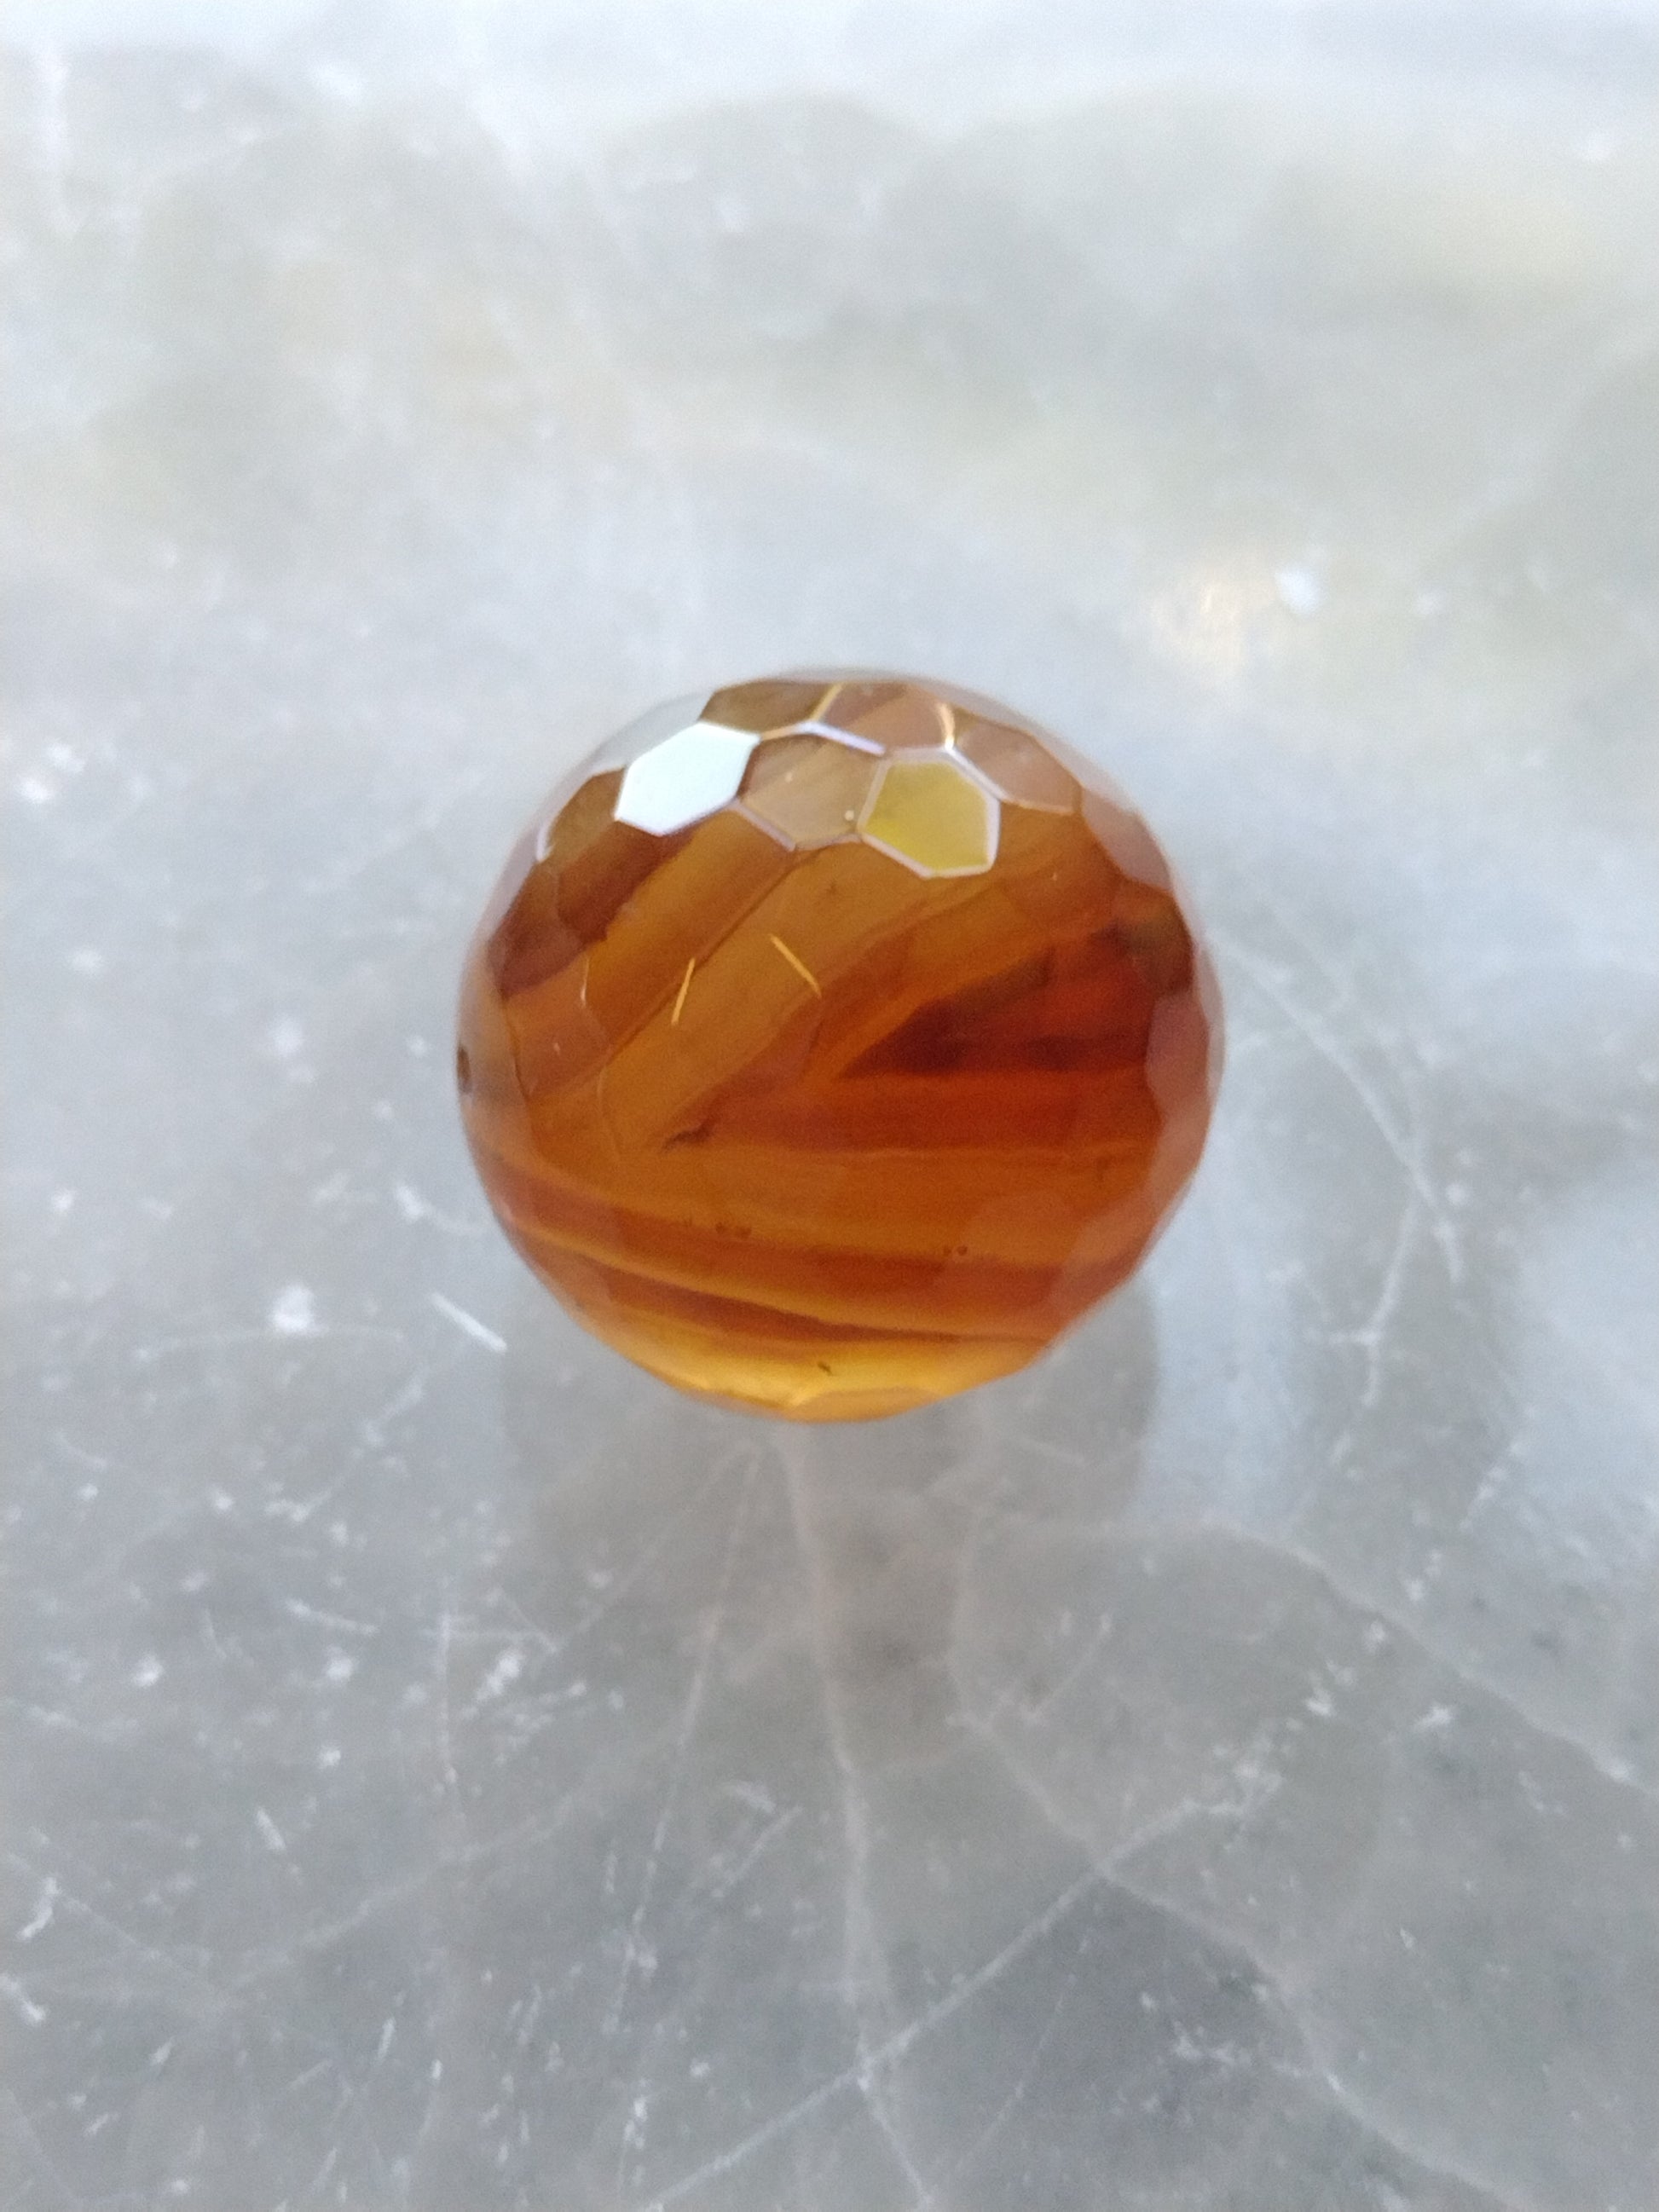 Crafting supplies such as agate beads available at wholesale and retail prices, only at our crystal shop in San Diego!